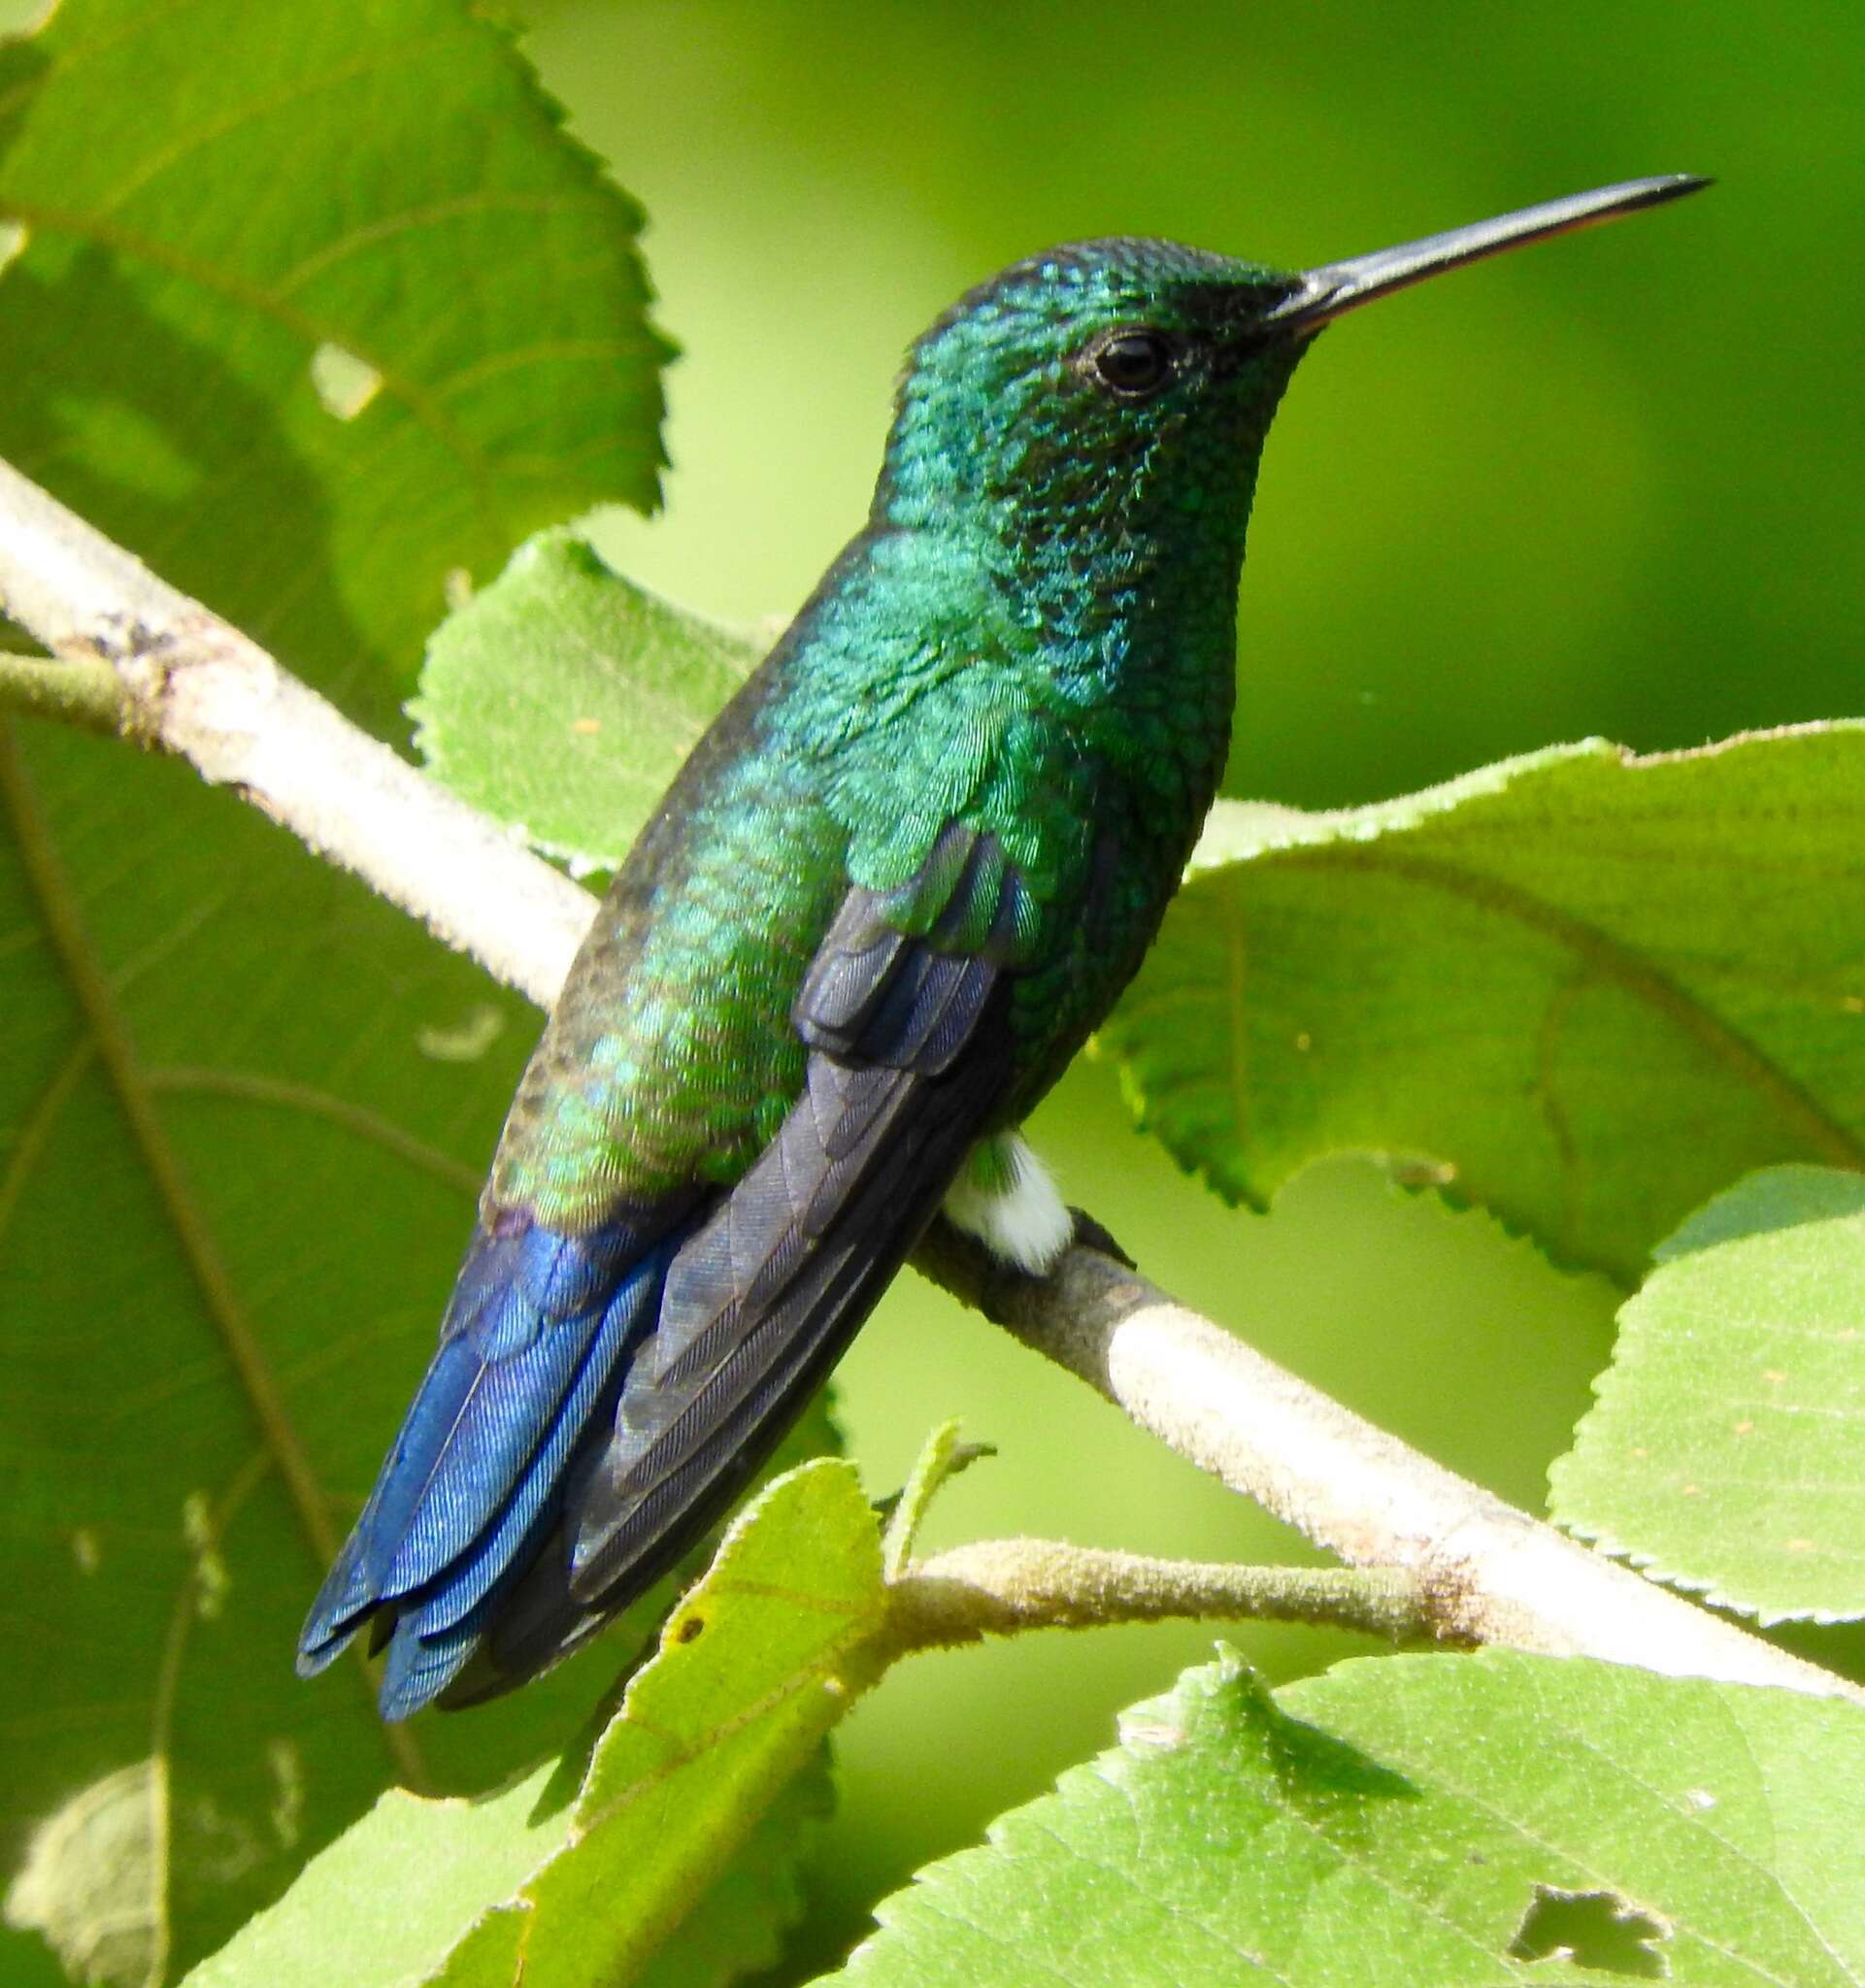 Image of Steely-vented Hummingbird